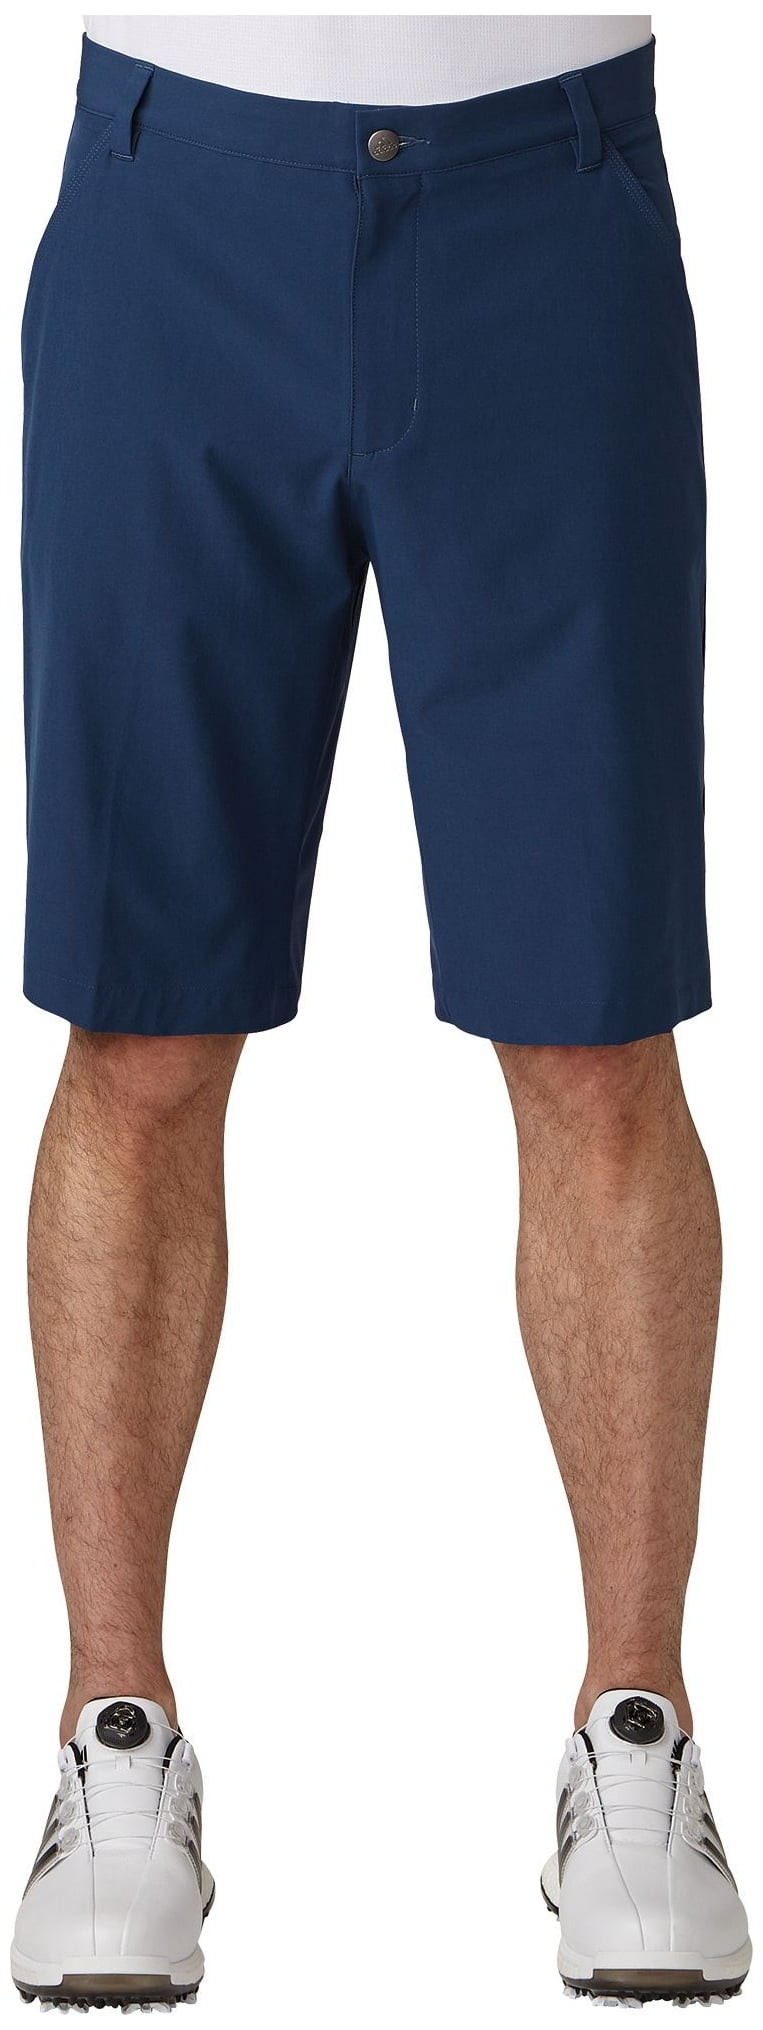 adidas climacool ultimate 365 airflow shorts